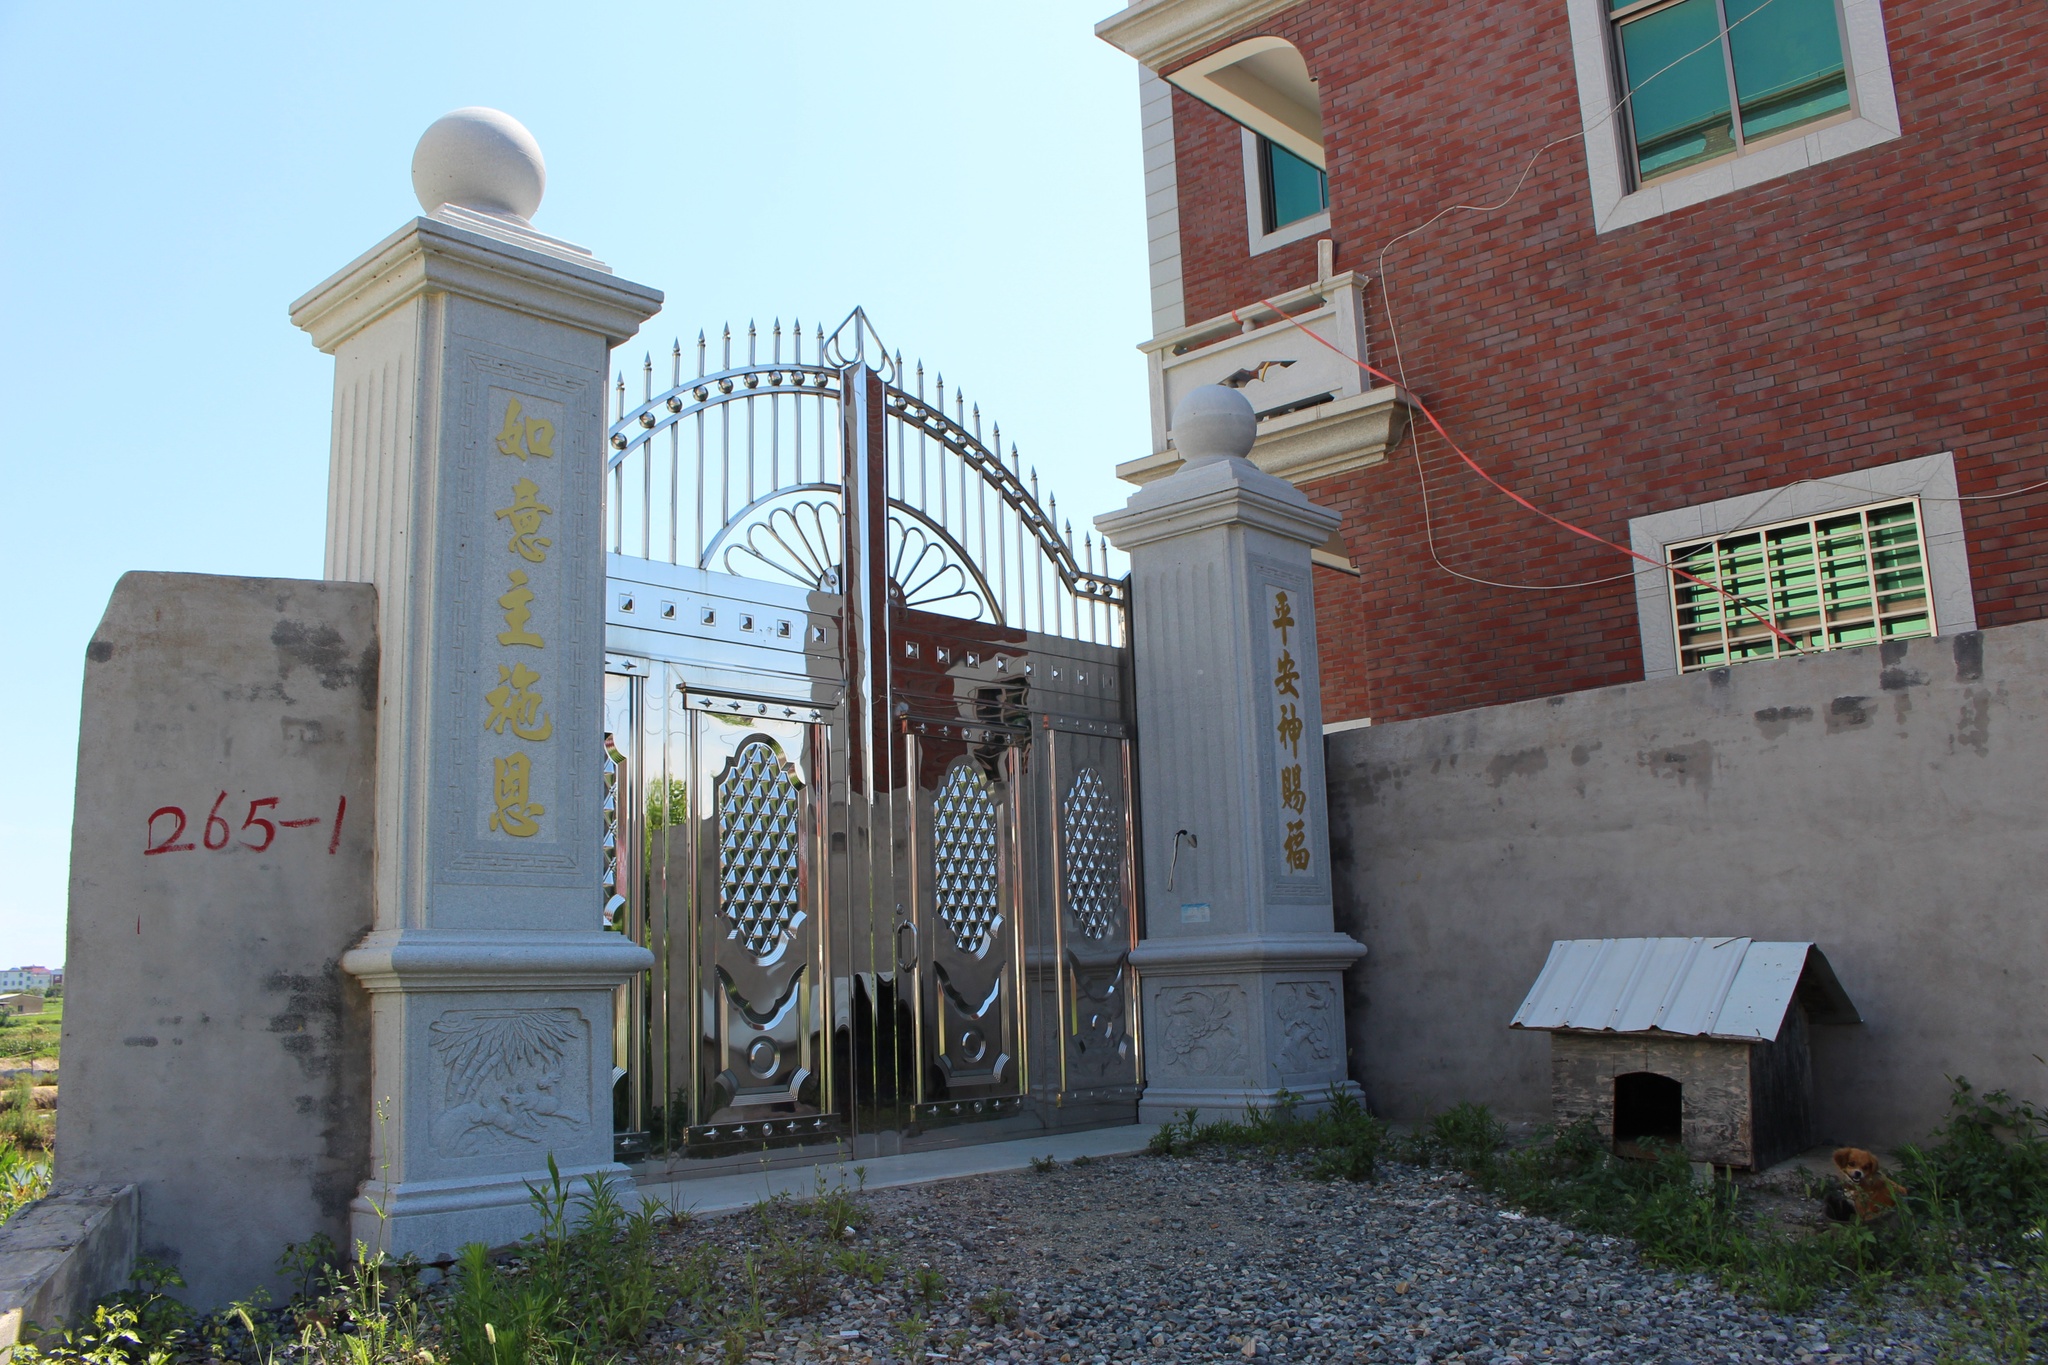 Two concrete columns with writing in gold Chinese characters that stand with a steel gate closed between them. To the right rise a concrete wall and brick, two-story house. To the side of the left column, an empty lot with green grass is visible in the background.